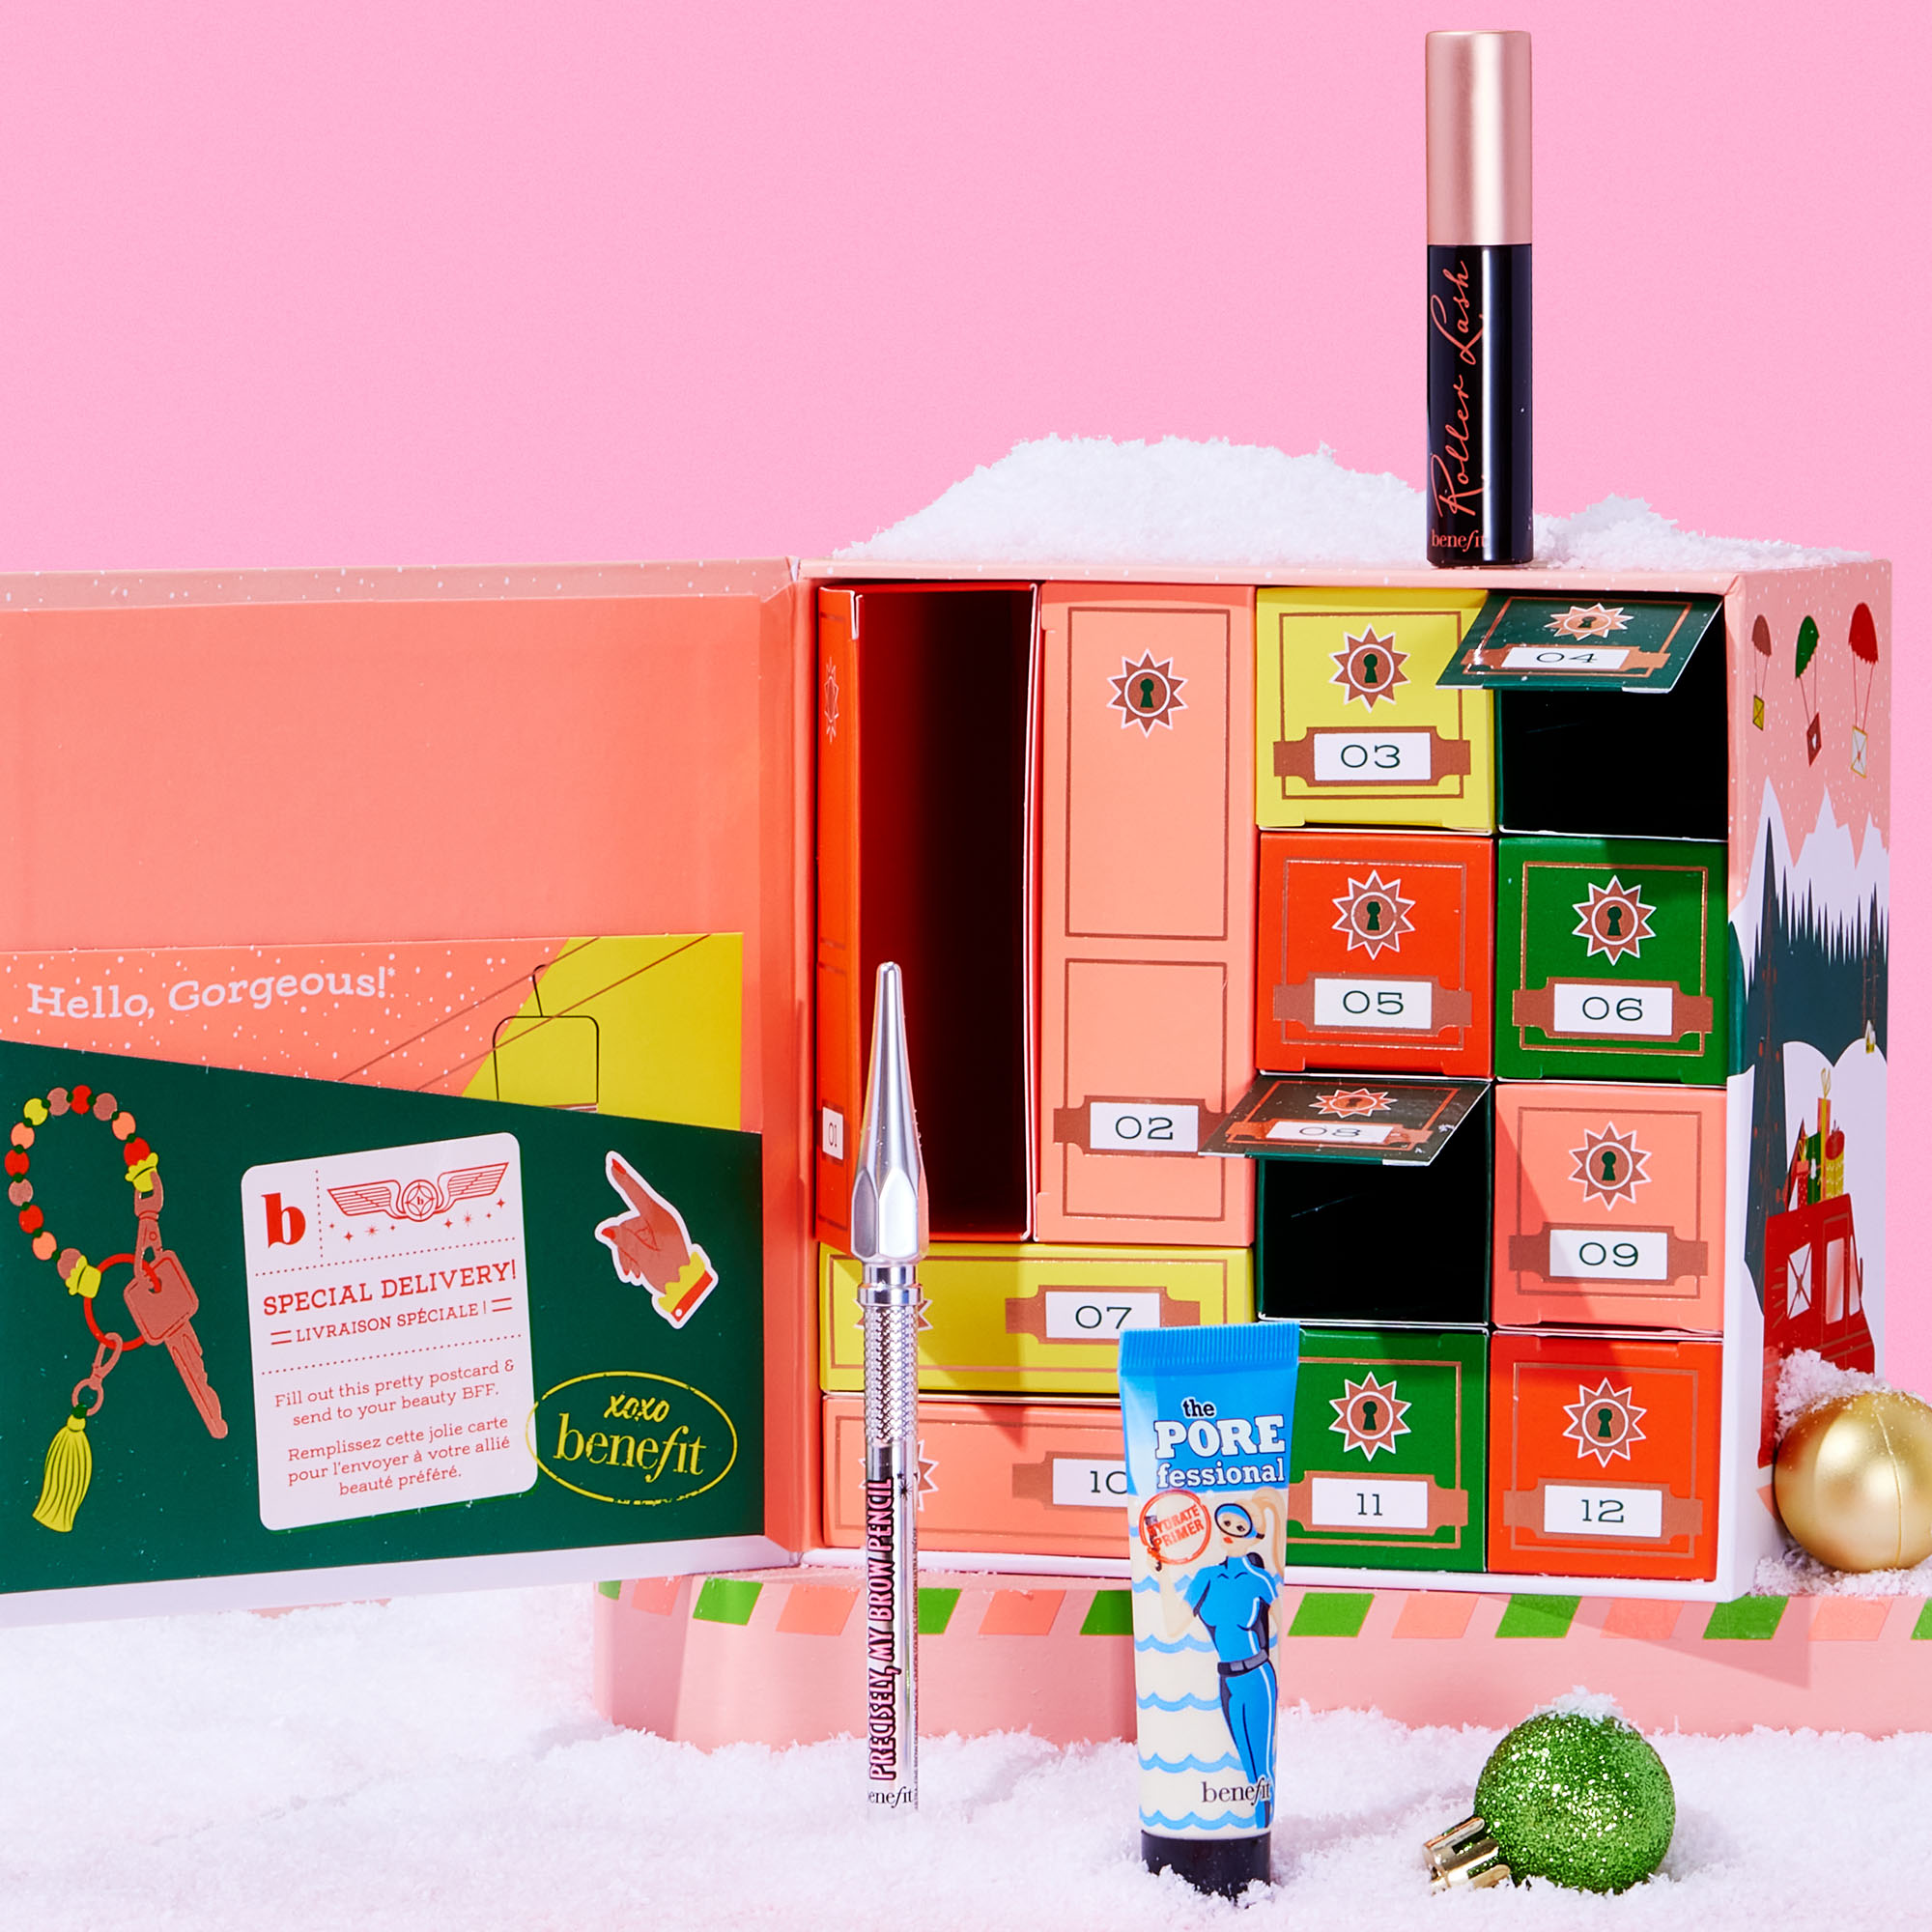 Benefit 'Sincerely Yours, Beauty Holiday' Advent Calendar